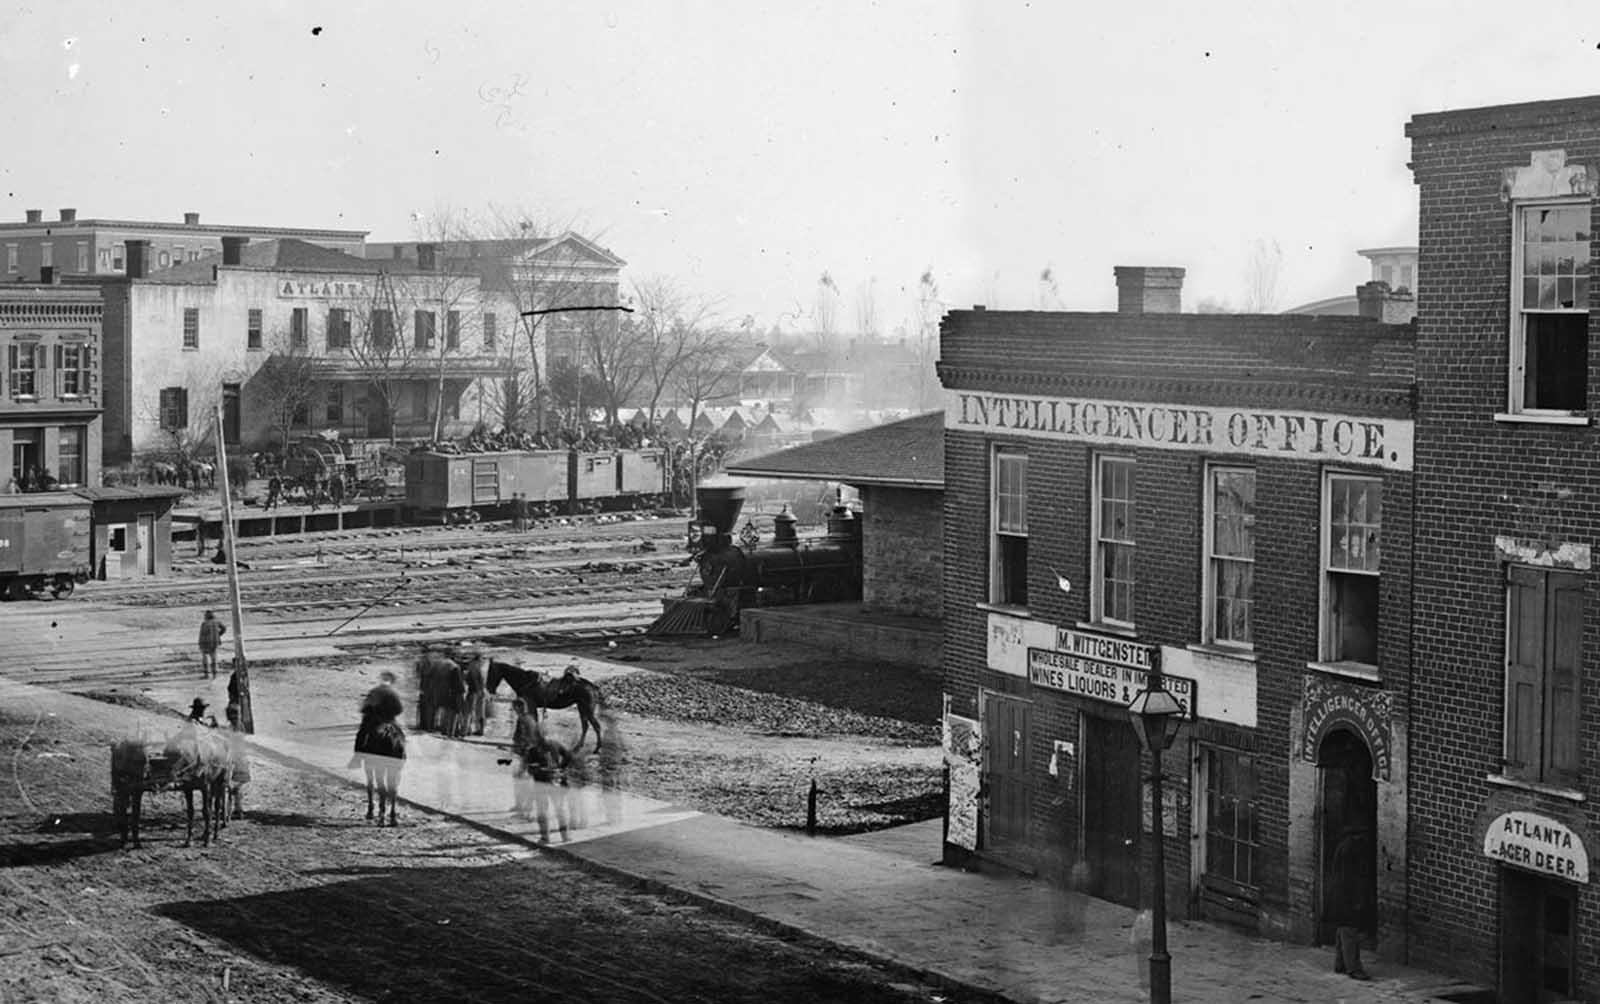 In Atlanta, Georgia, soldiers sit atop boxcars at a railroad depot. At right is the office of Atlanta's Daily Intelligencer newspaper. Panorama made from two photographs taken by George N. Barnard in 1864.